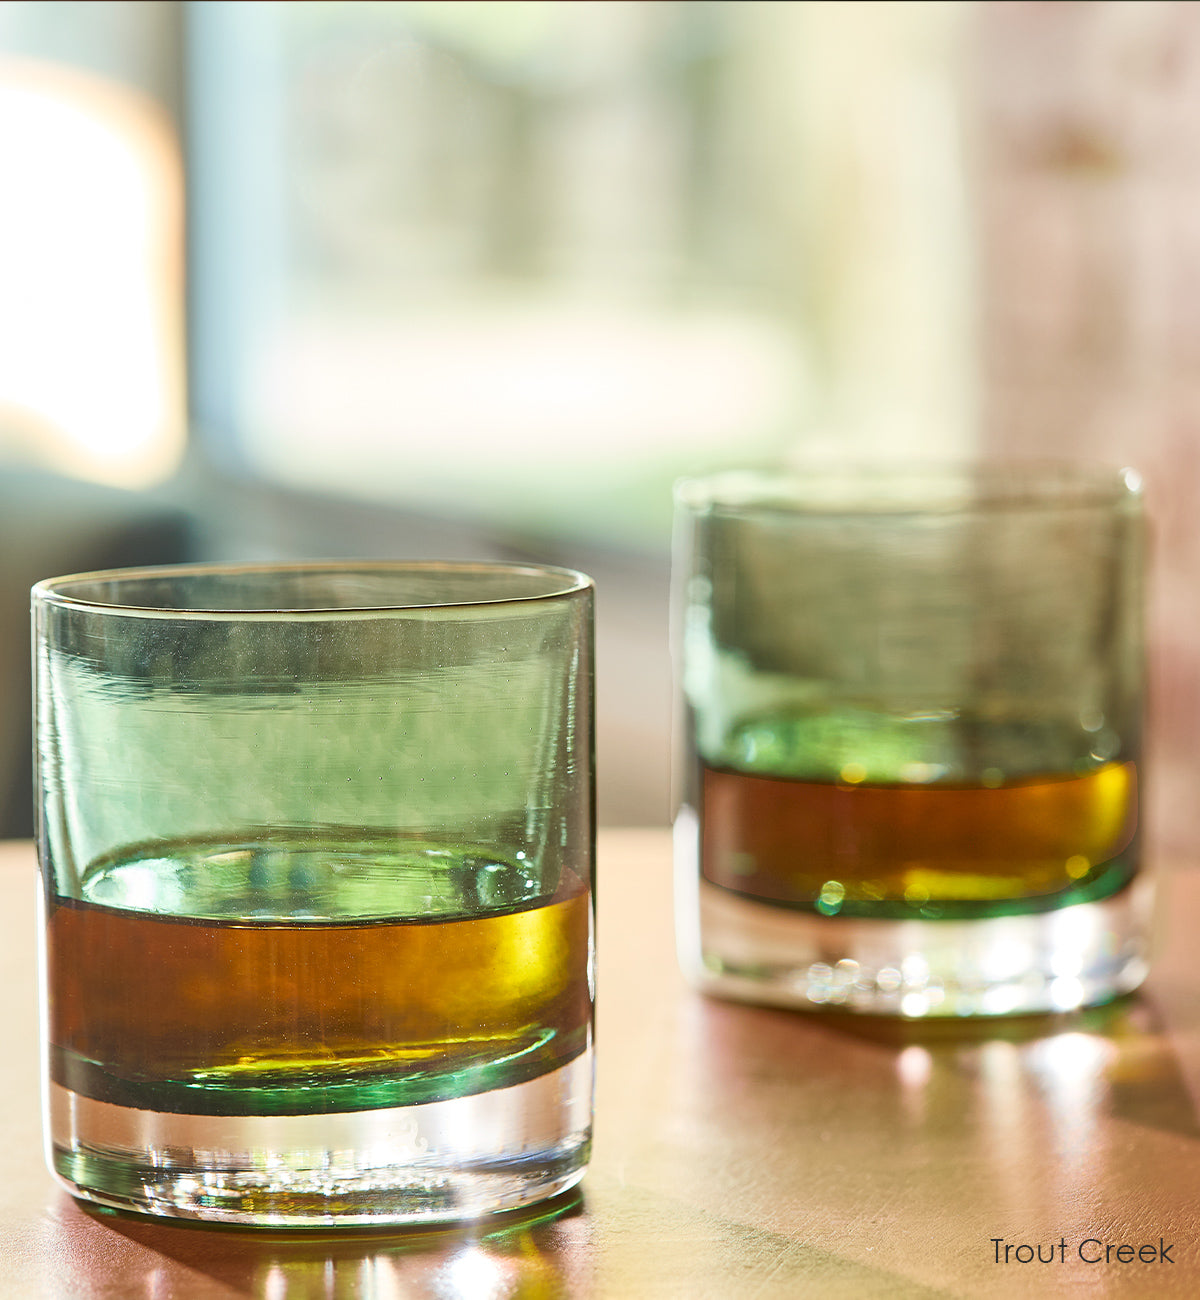 two Trout Creek rockers, dark green teal transparent hand-blown glass lowball drinking glasses with brown liquid inside on a light wood table.